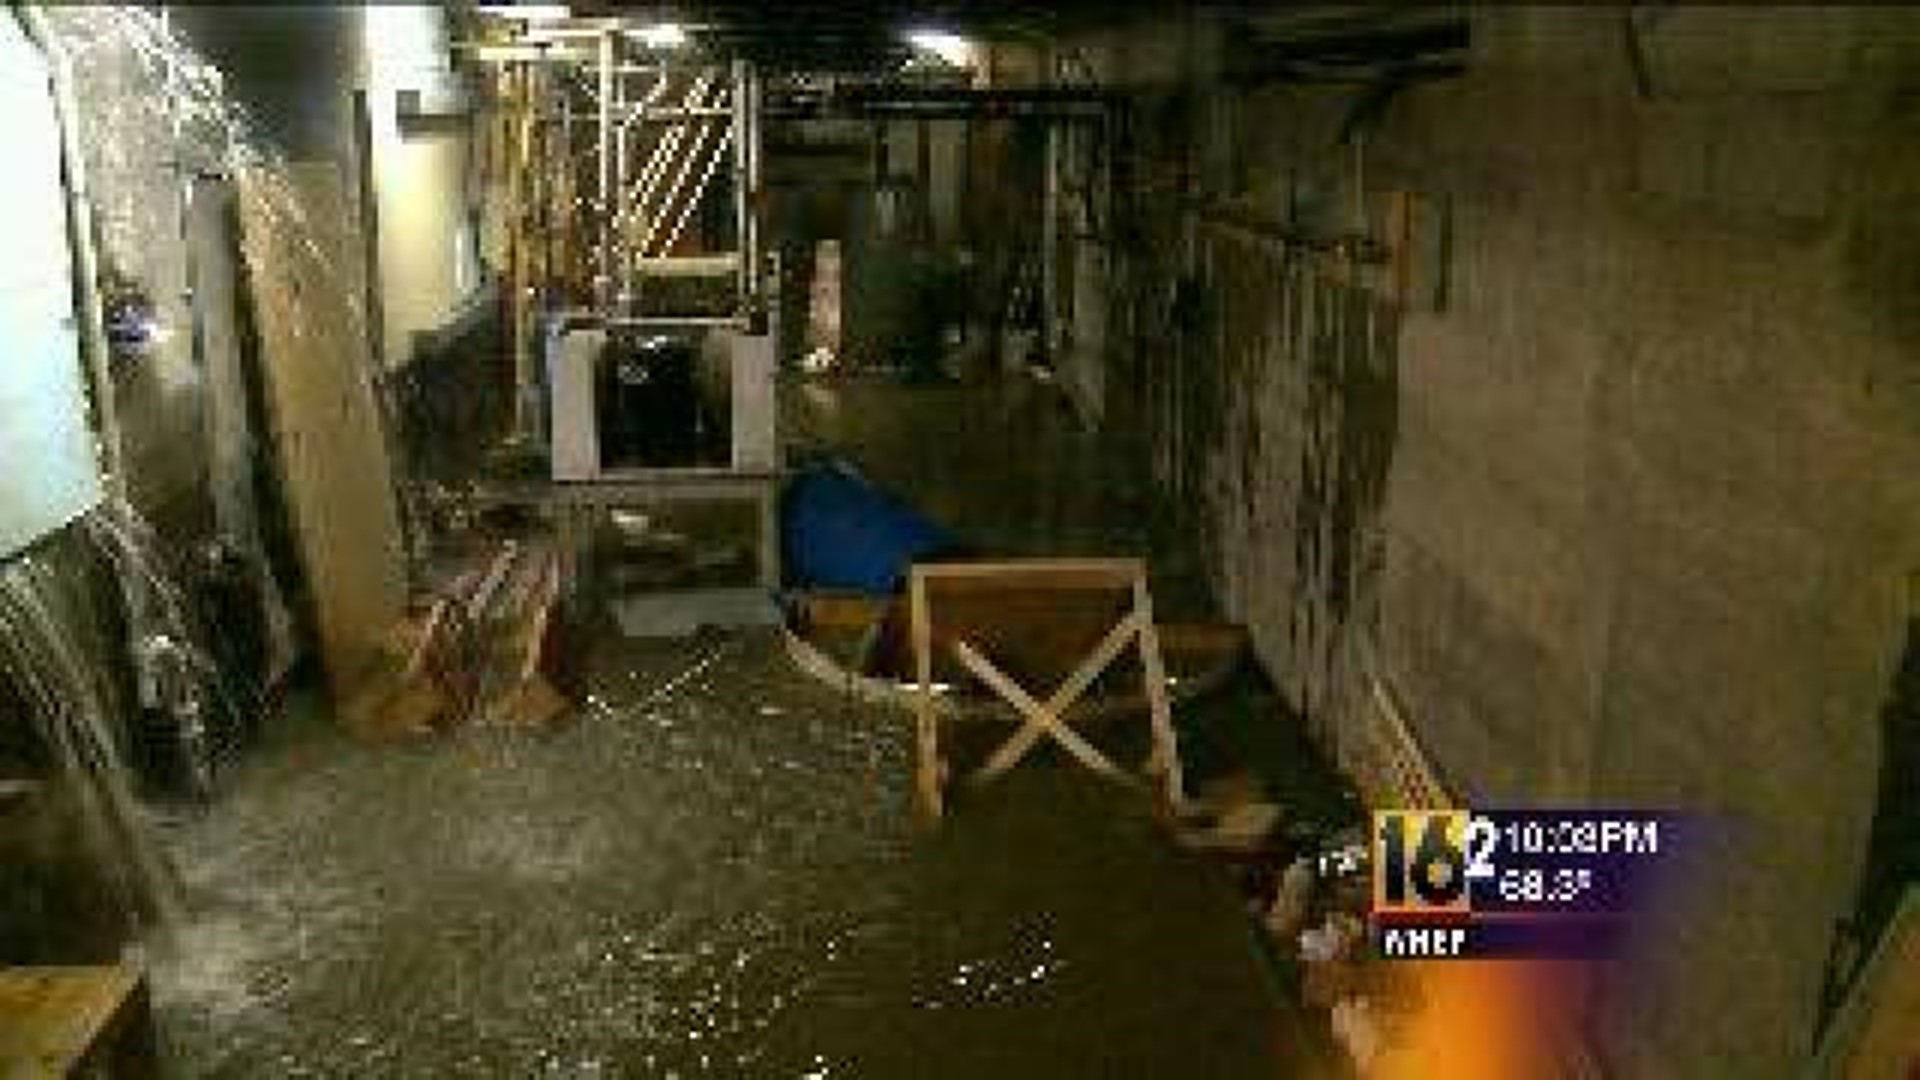 One Year After Flood: The Dietrich Theater